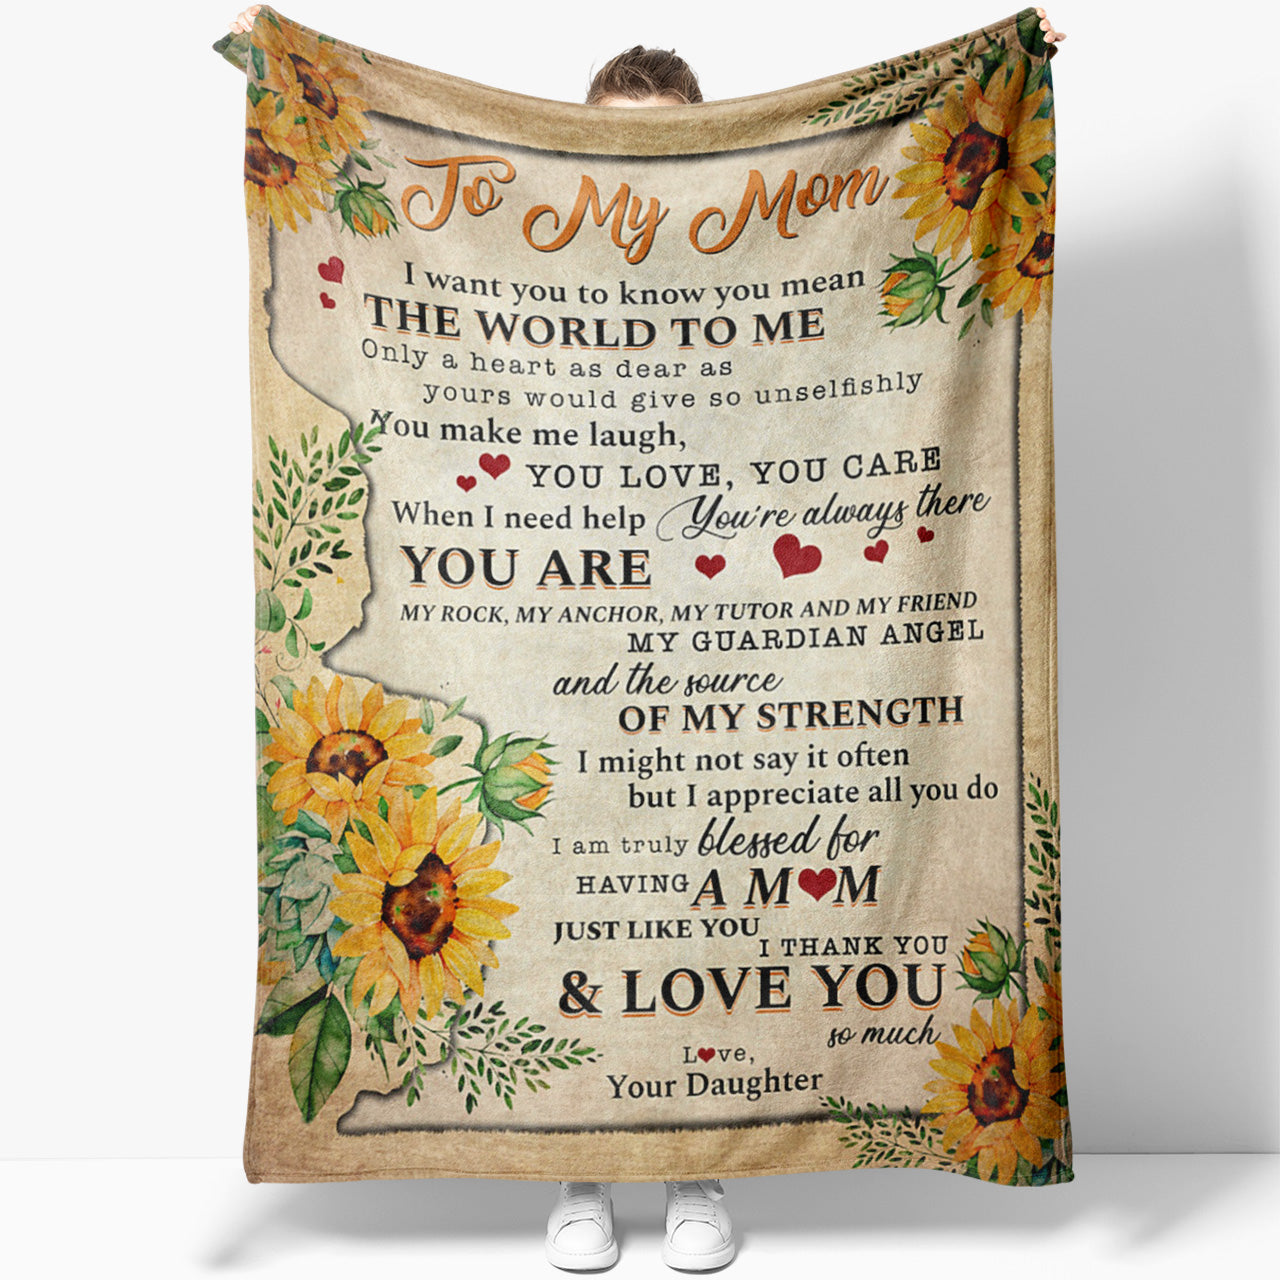 Blanket Gift Ideas For Mom, You Mean The World, Good Mothers Day Gifts  Ideas, Mother Christmas Gifts, Funny Gifts Things To Get Your Mom's Day  Gifts - Sweet Family Gift